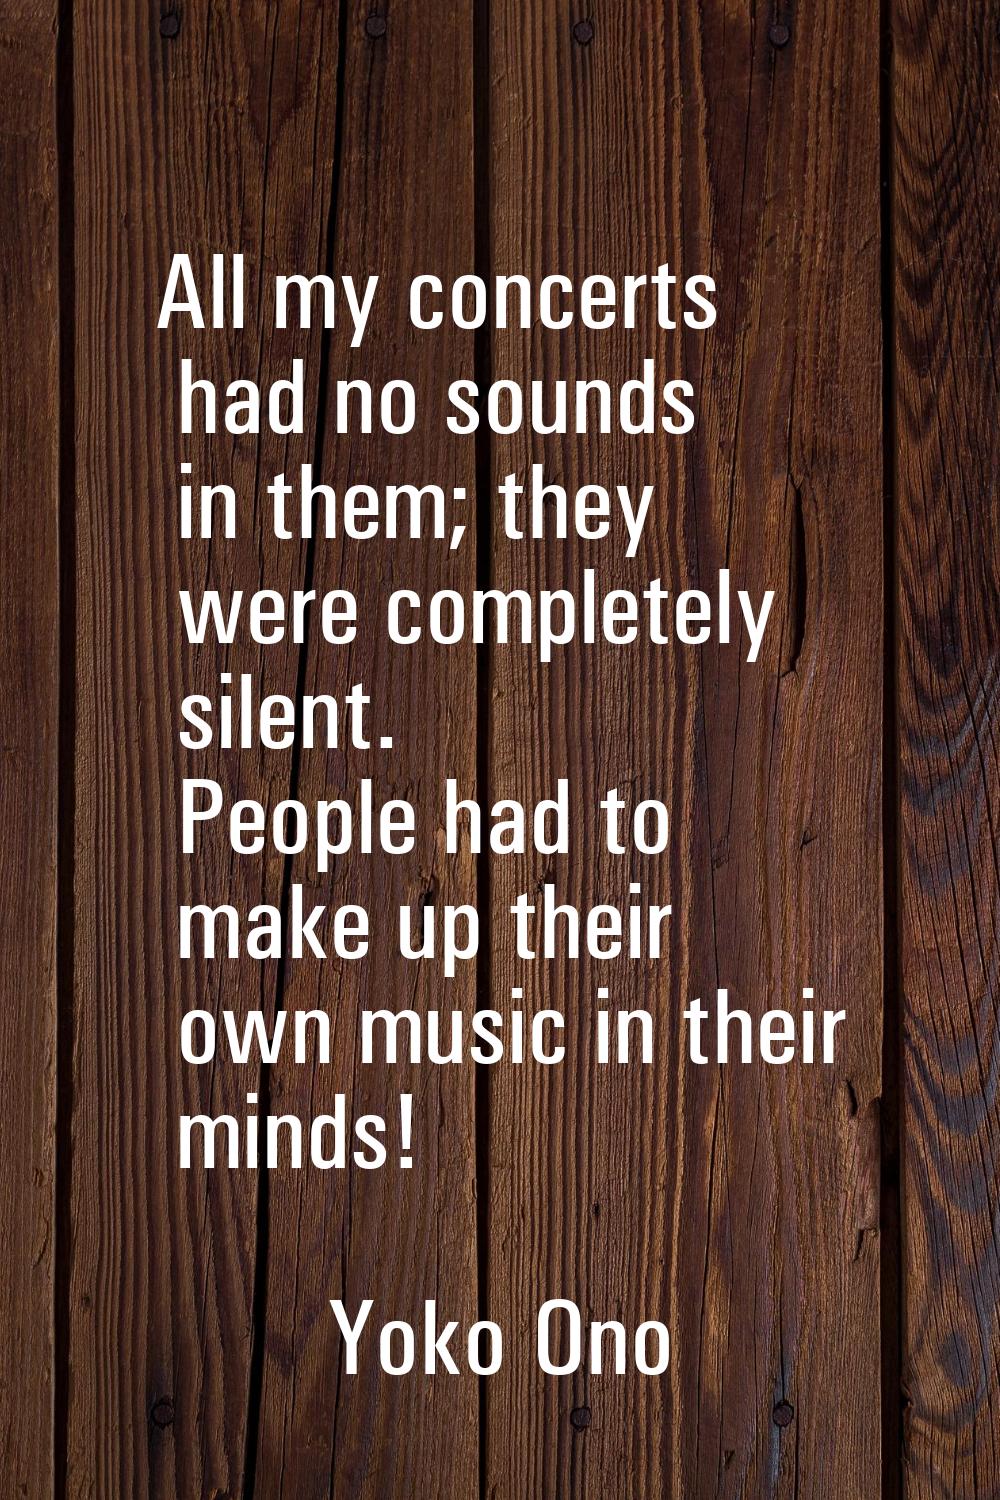 All my concerts had no sounds in them; they were completely silent. People had to make up their own